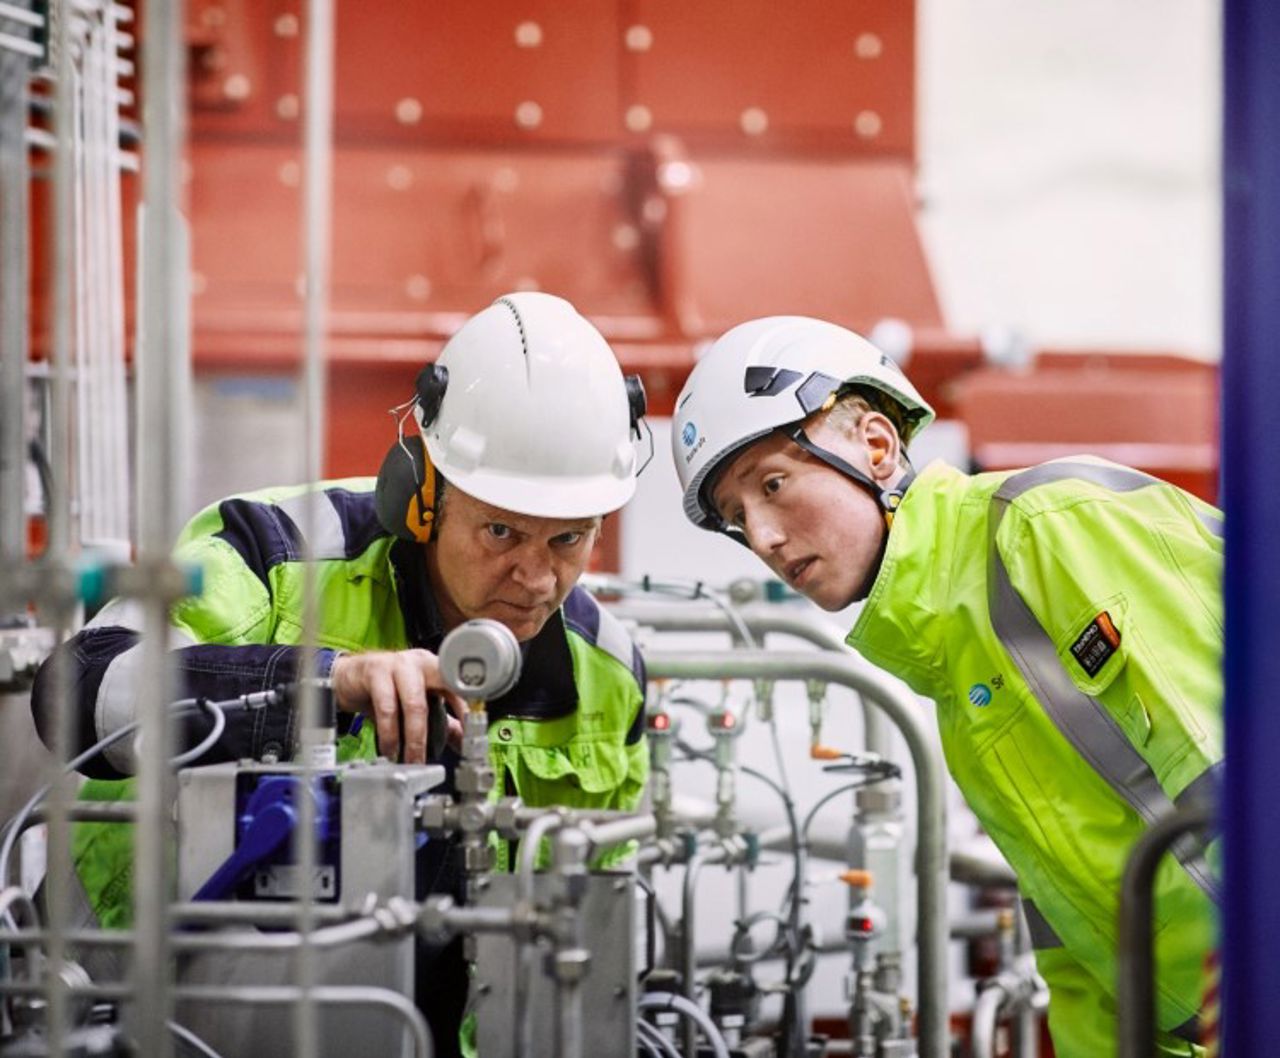 Two Statkraft employees working at Ringedalen power plant